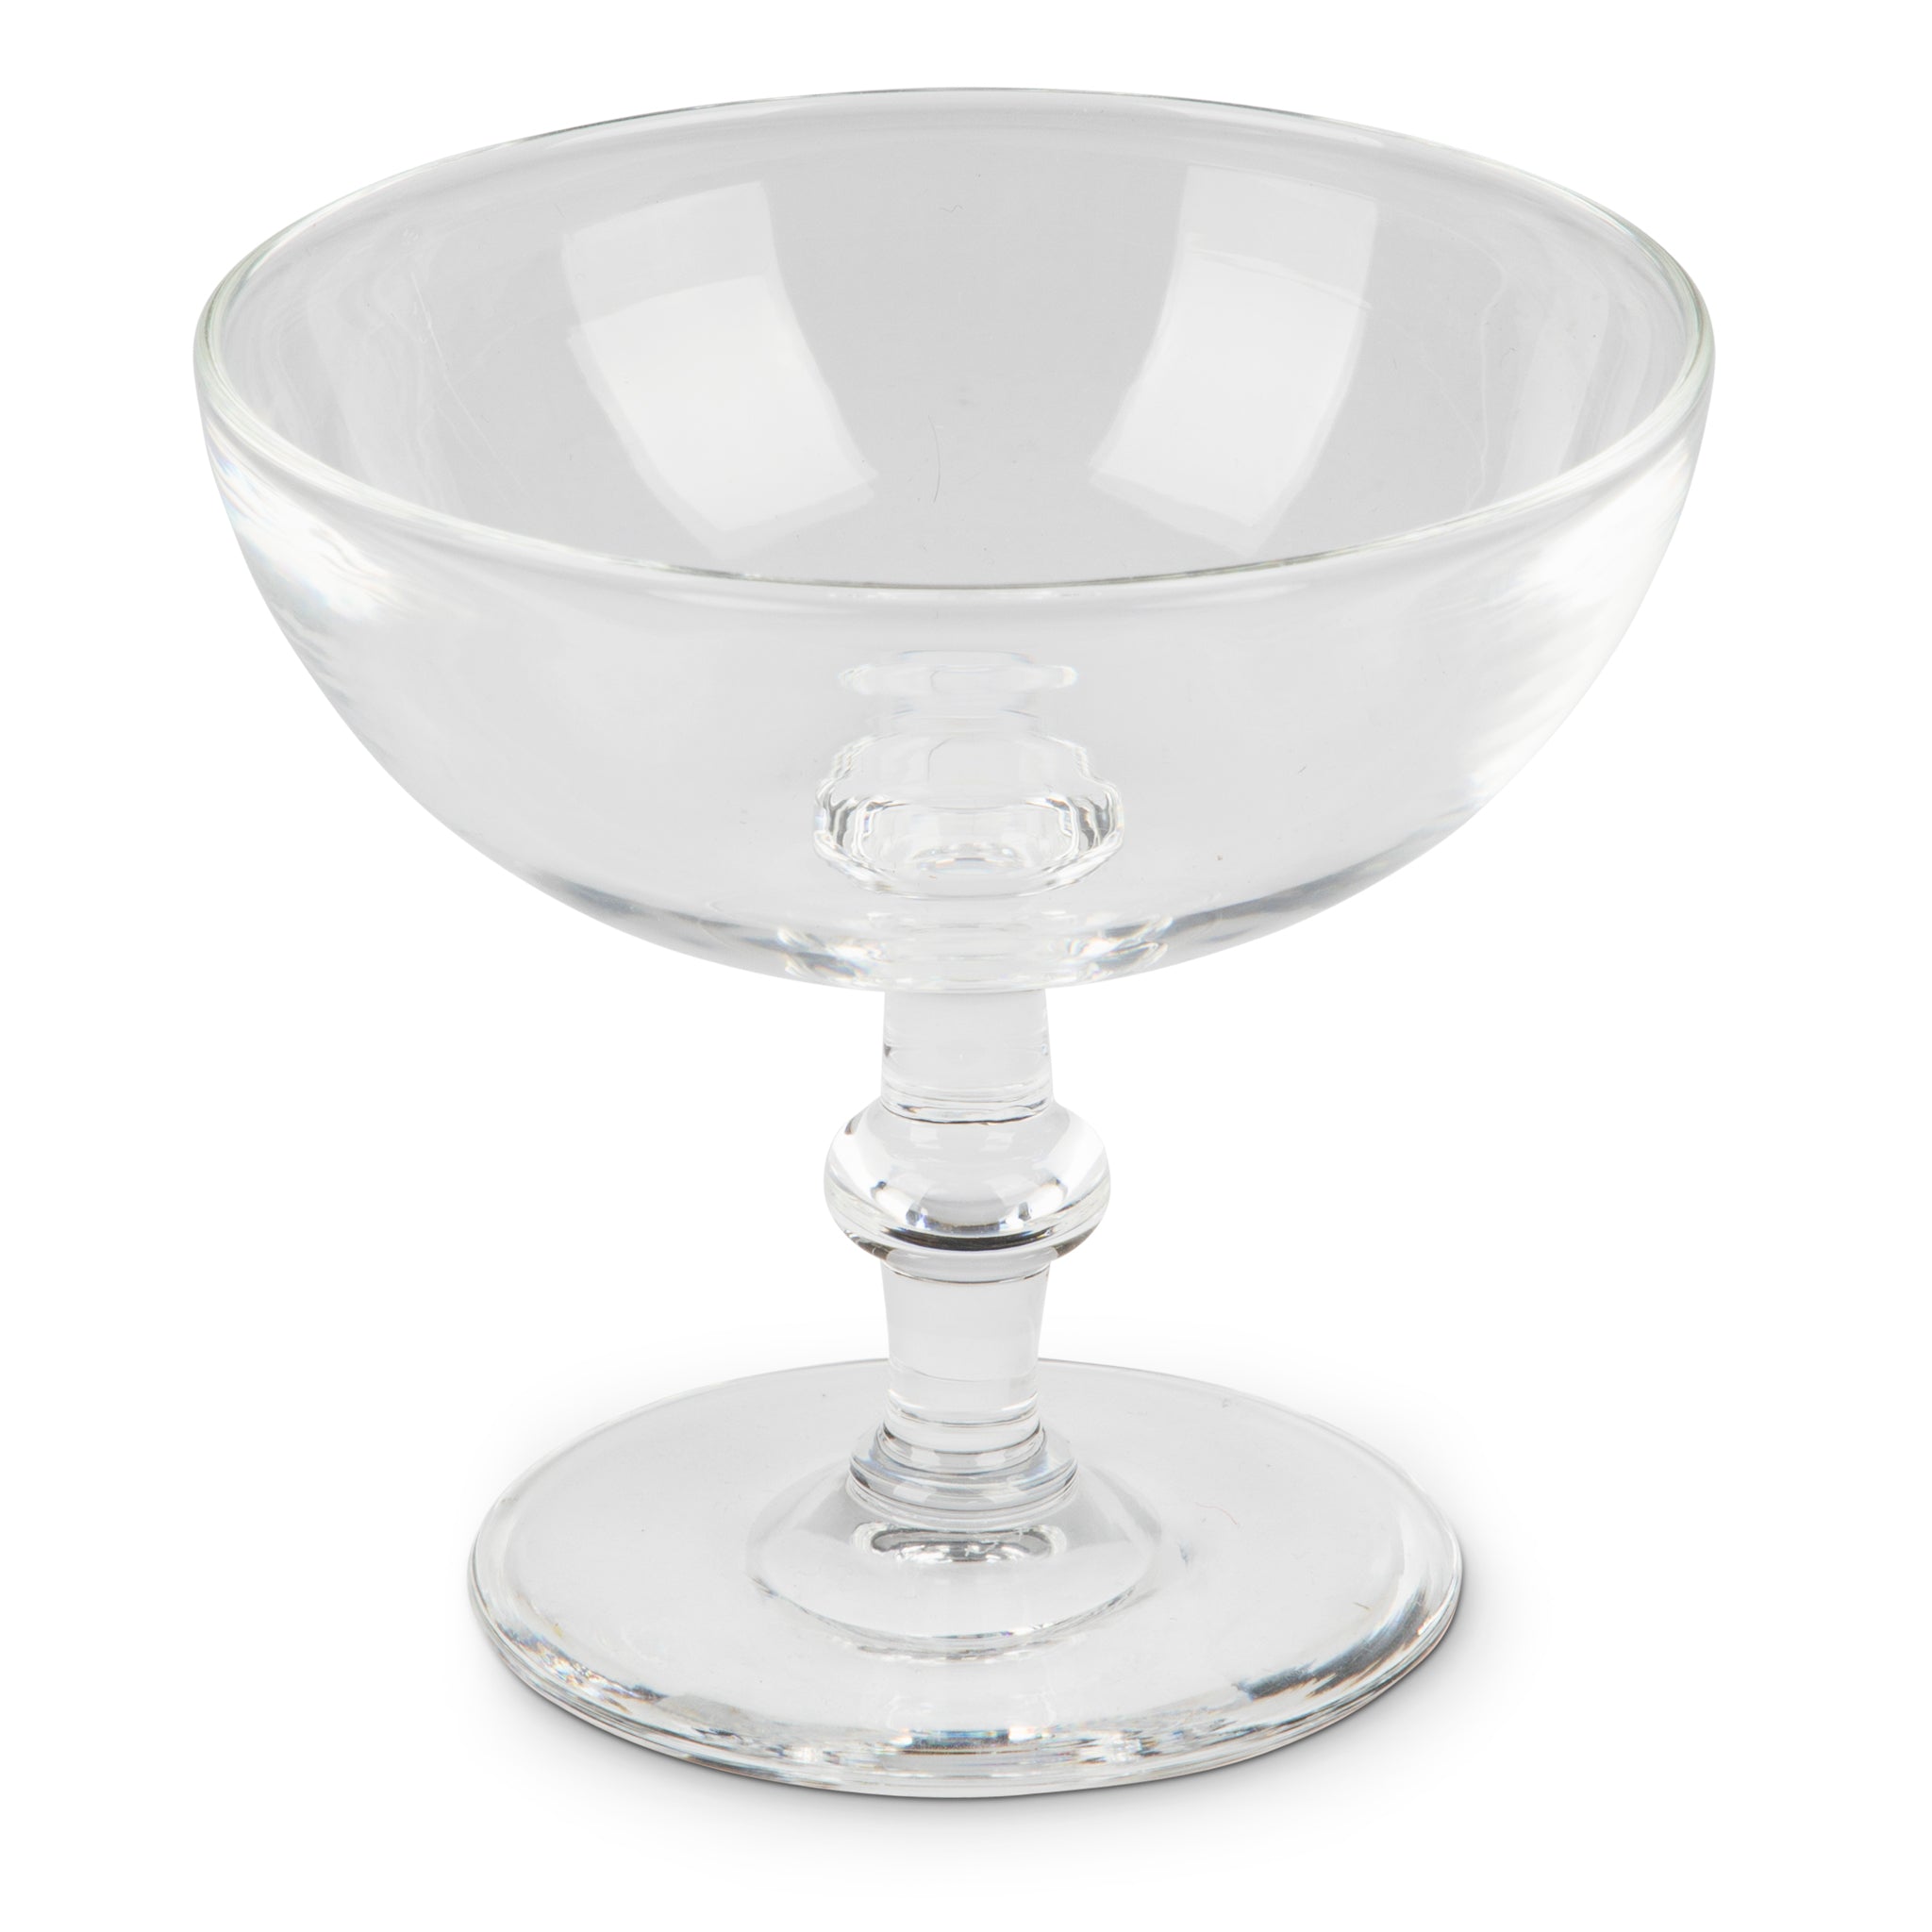 Steuben Crystal Champagne Coupe